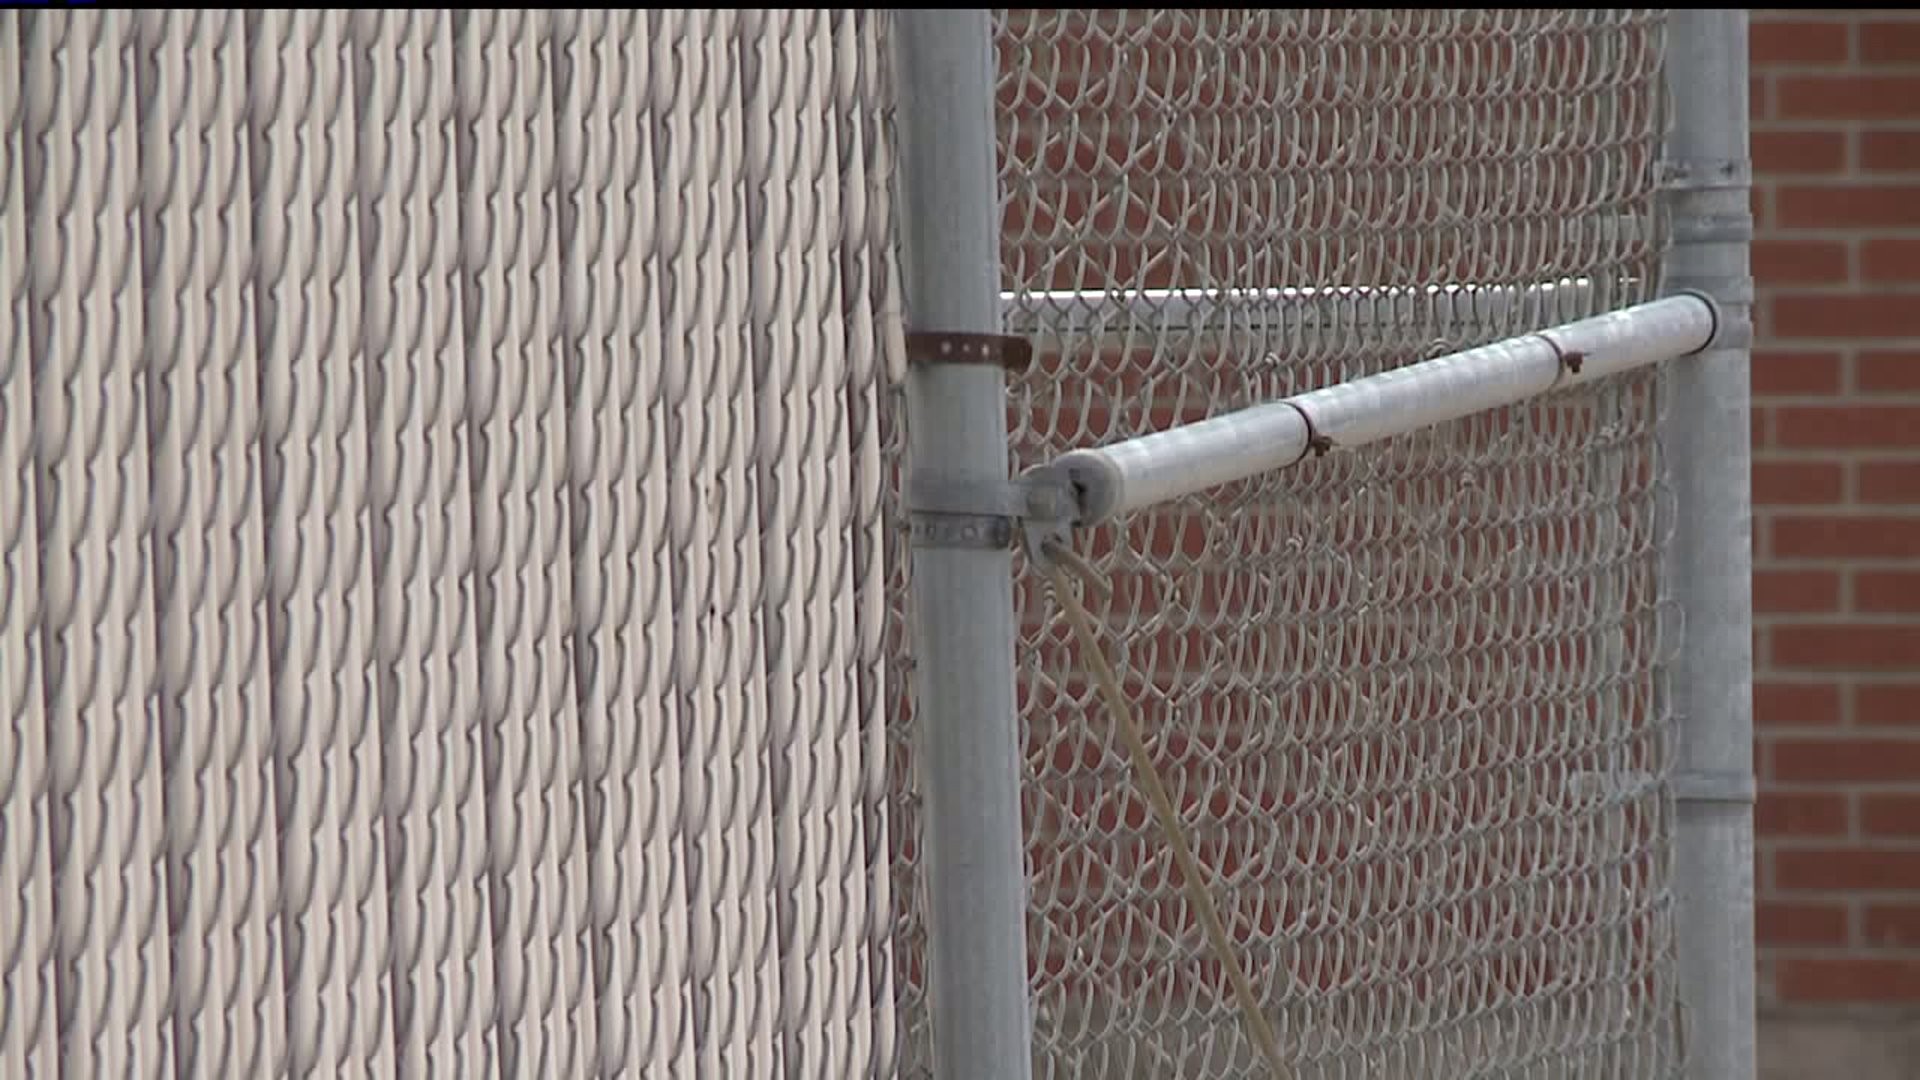 Changes coming to jail in Maquoketa